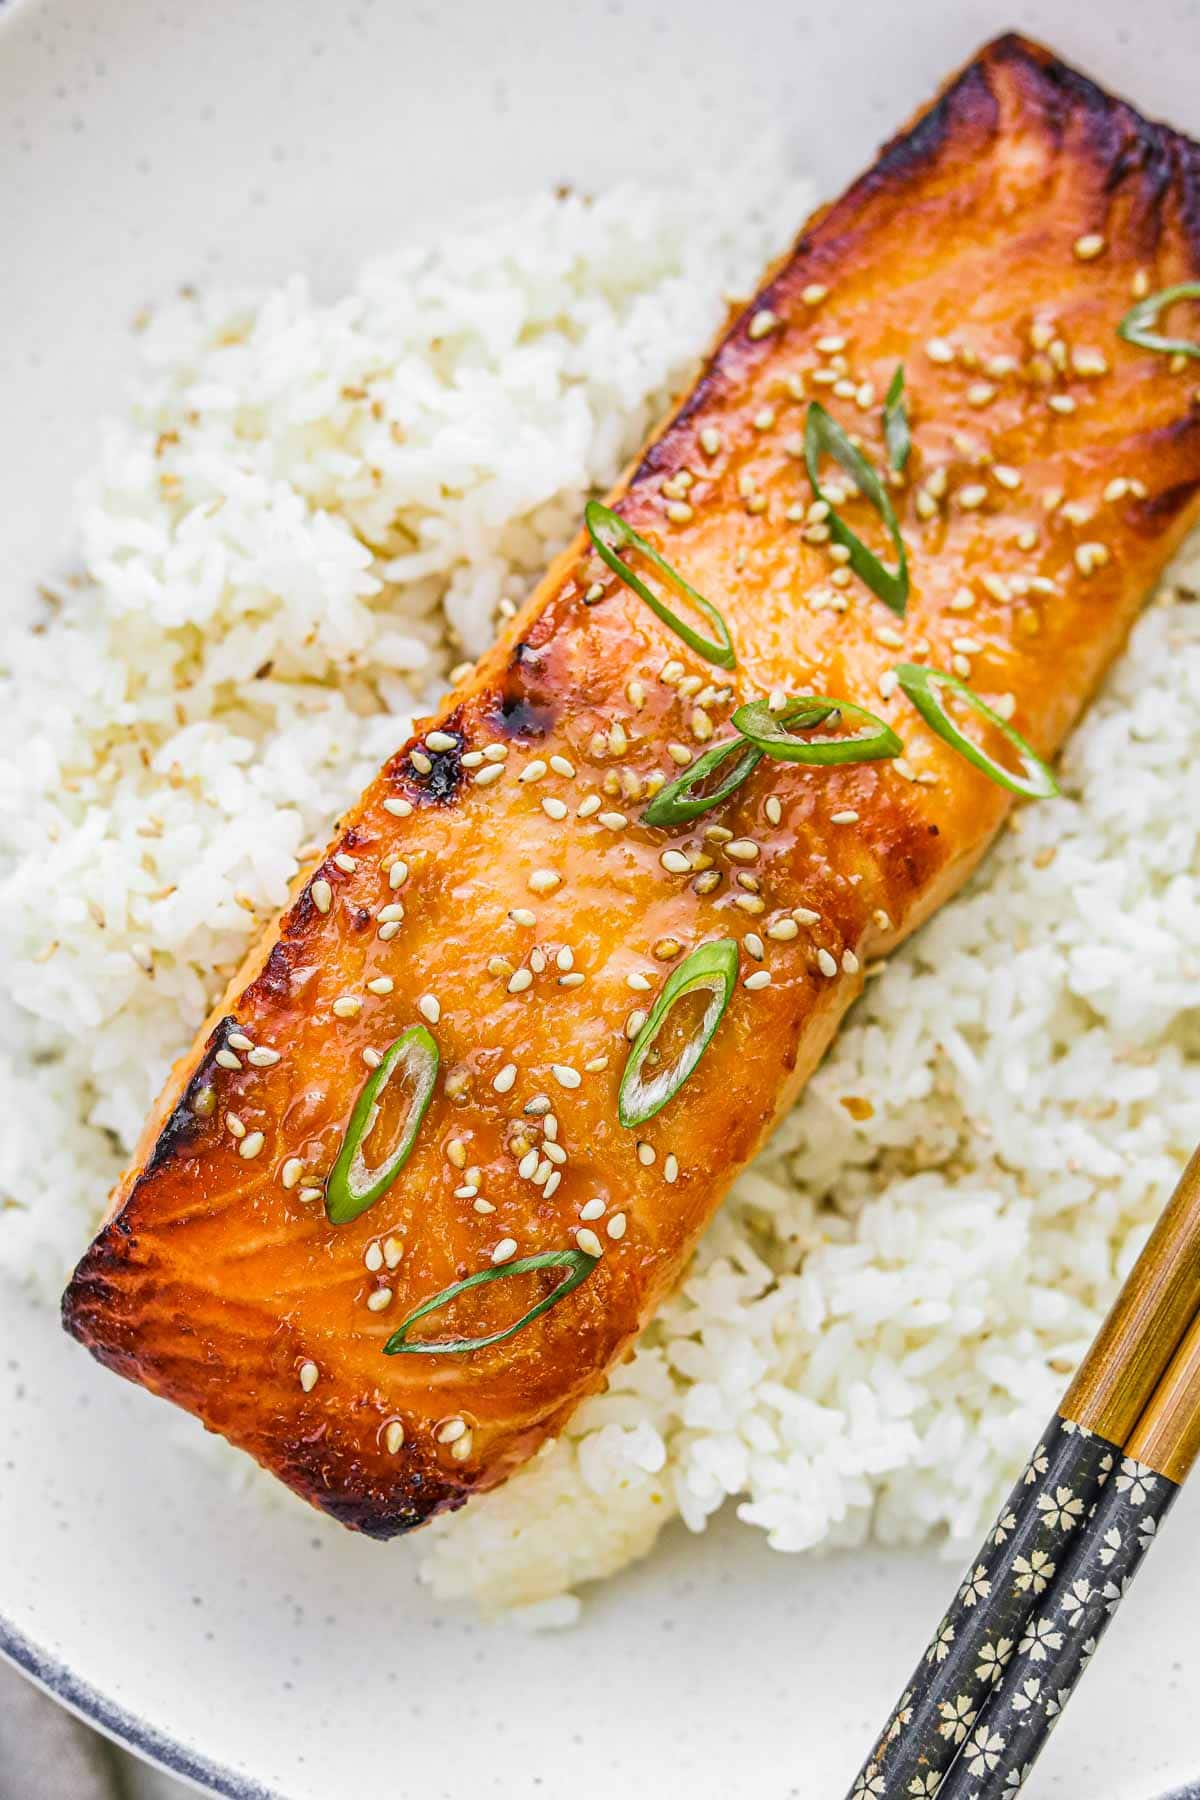 Broiled miso-glazed salmon with charred edges and a medium-rare center on a bed of Japanese rice.